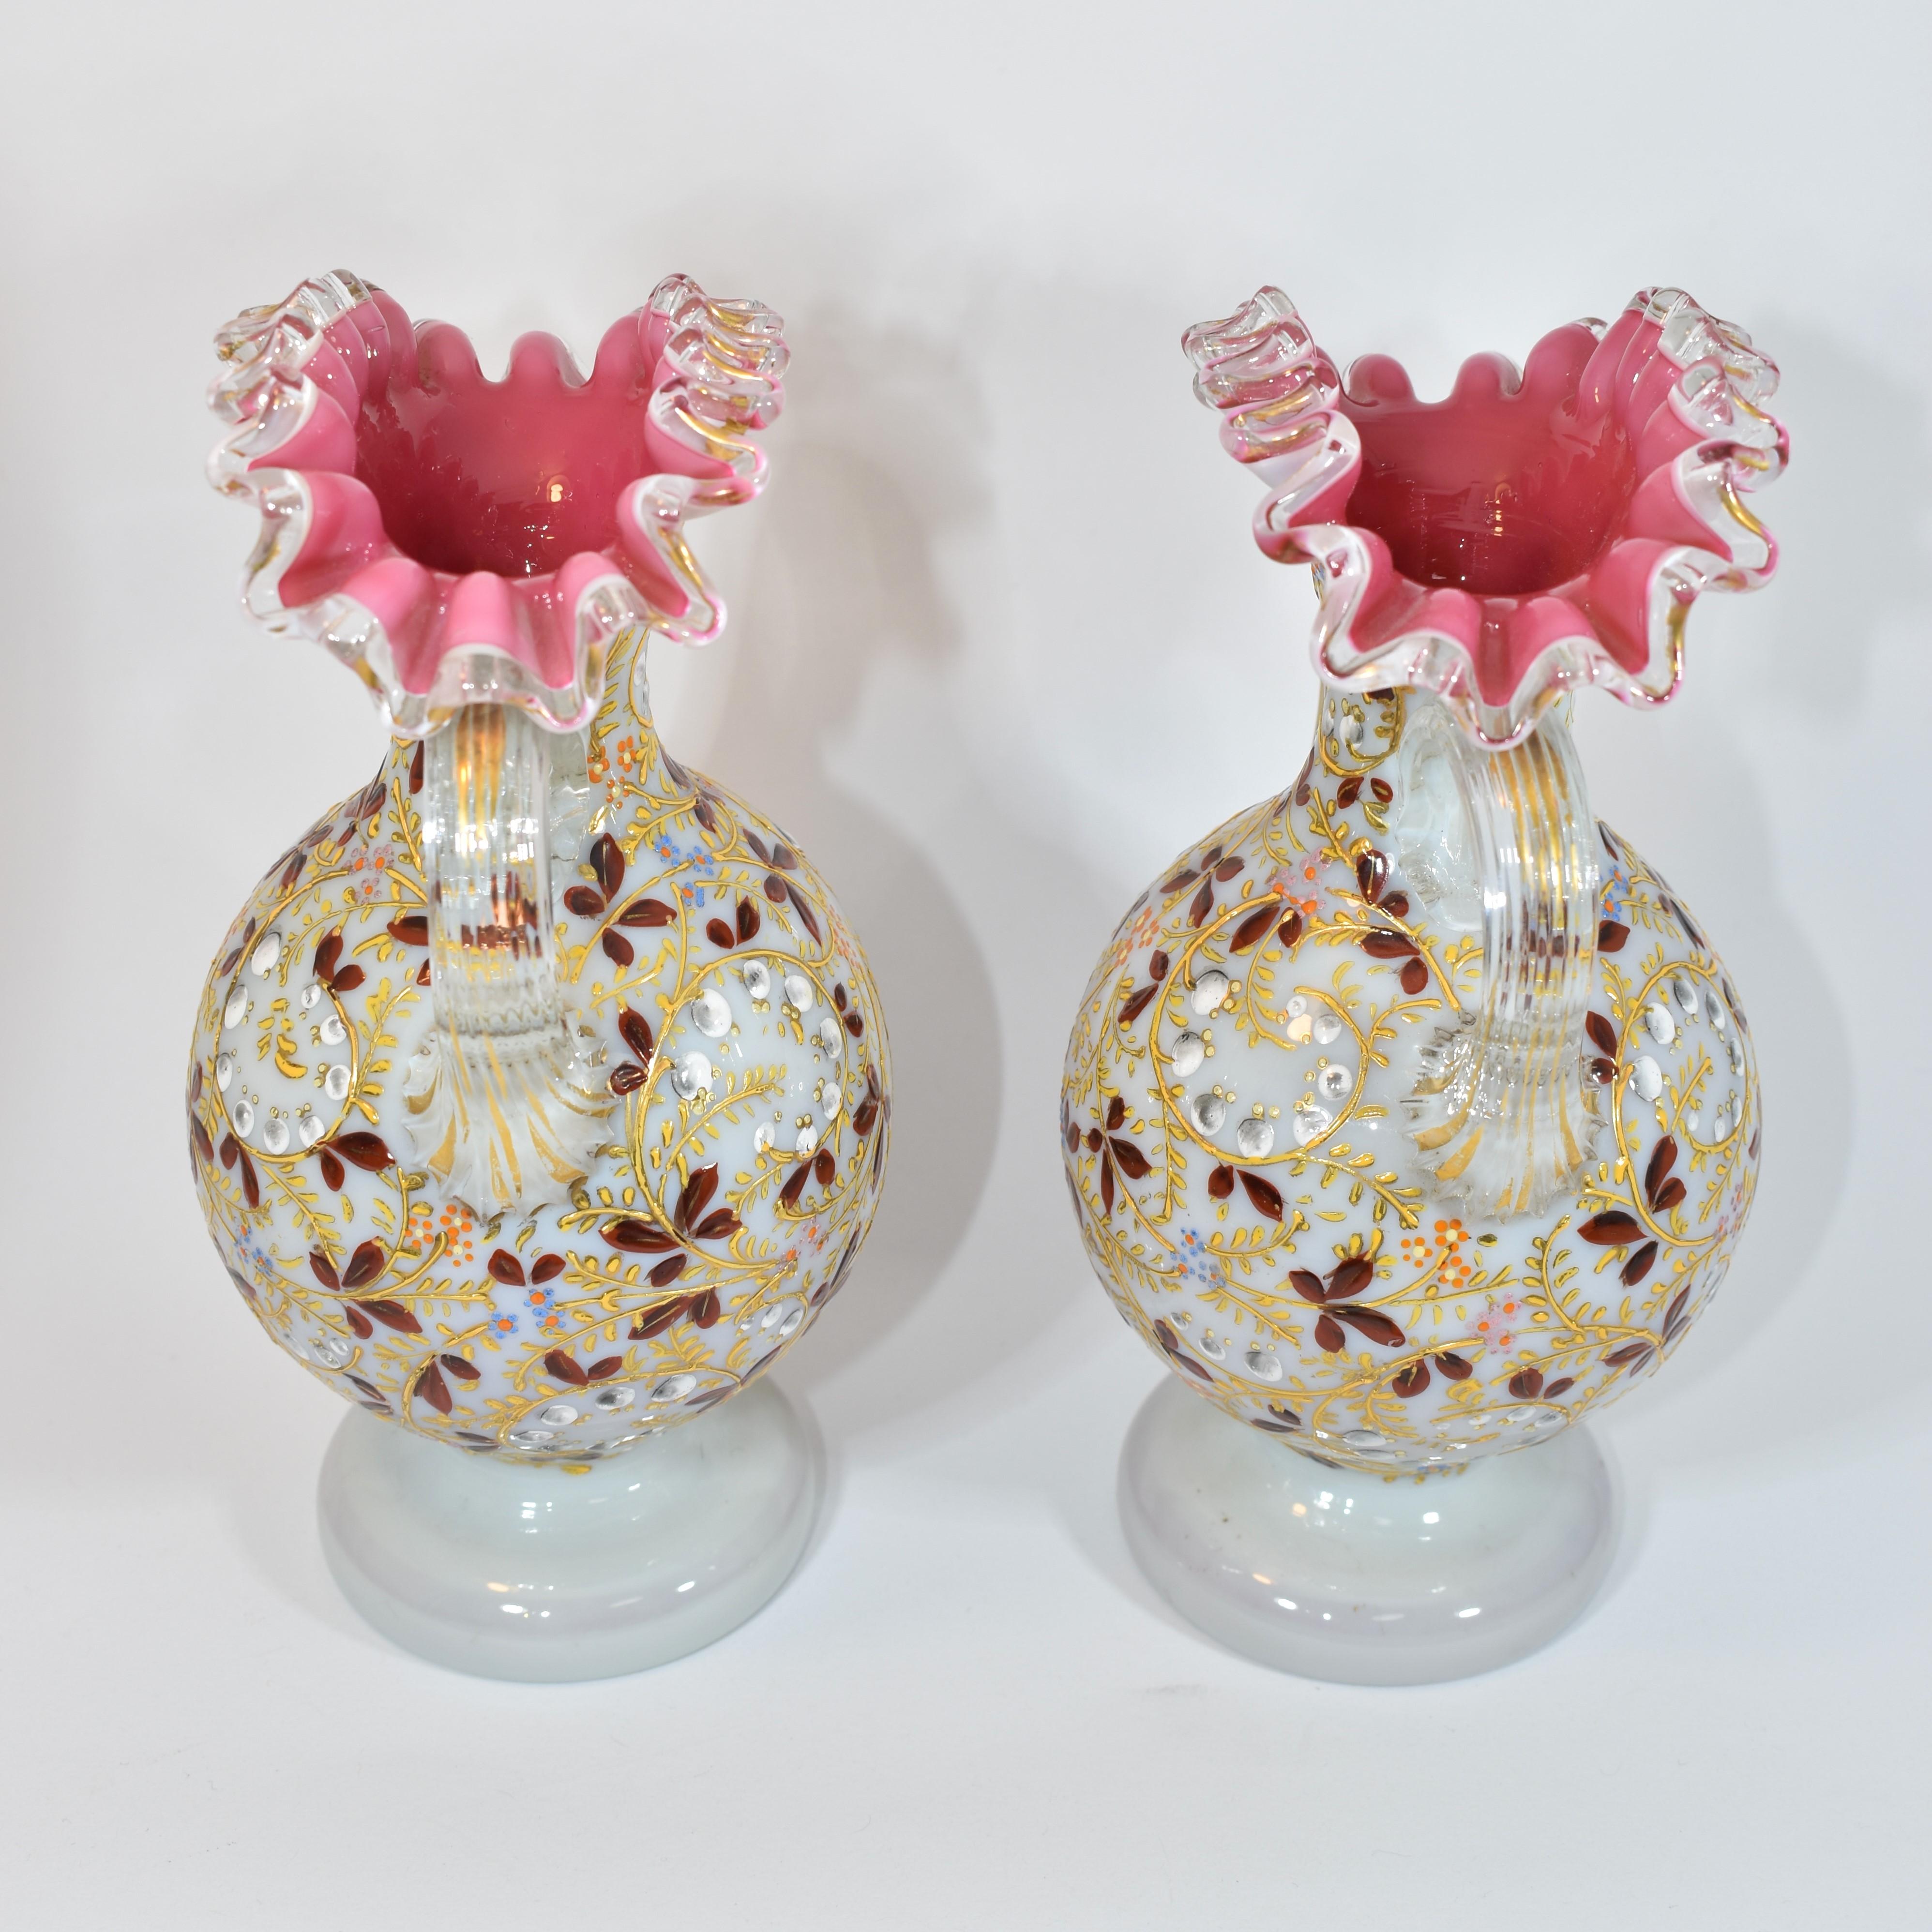 Antique Pair of Opaline Overlay Enamelled Glass Vases, Moser, 19th Century In Good Condition For Sale In Rostock, MV